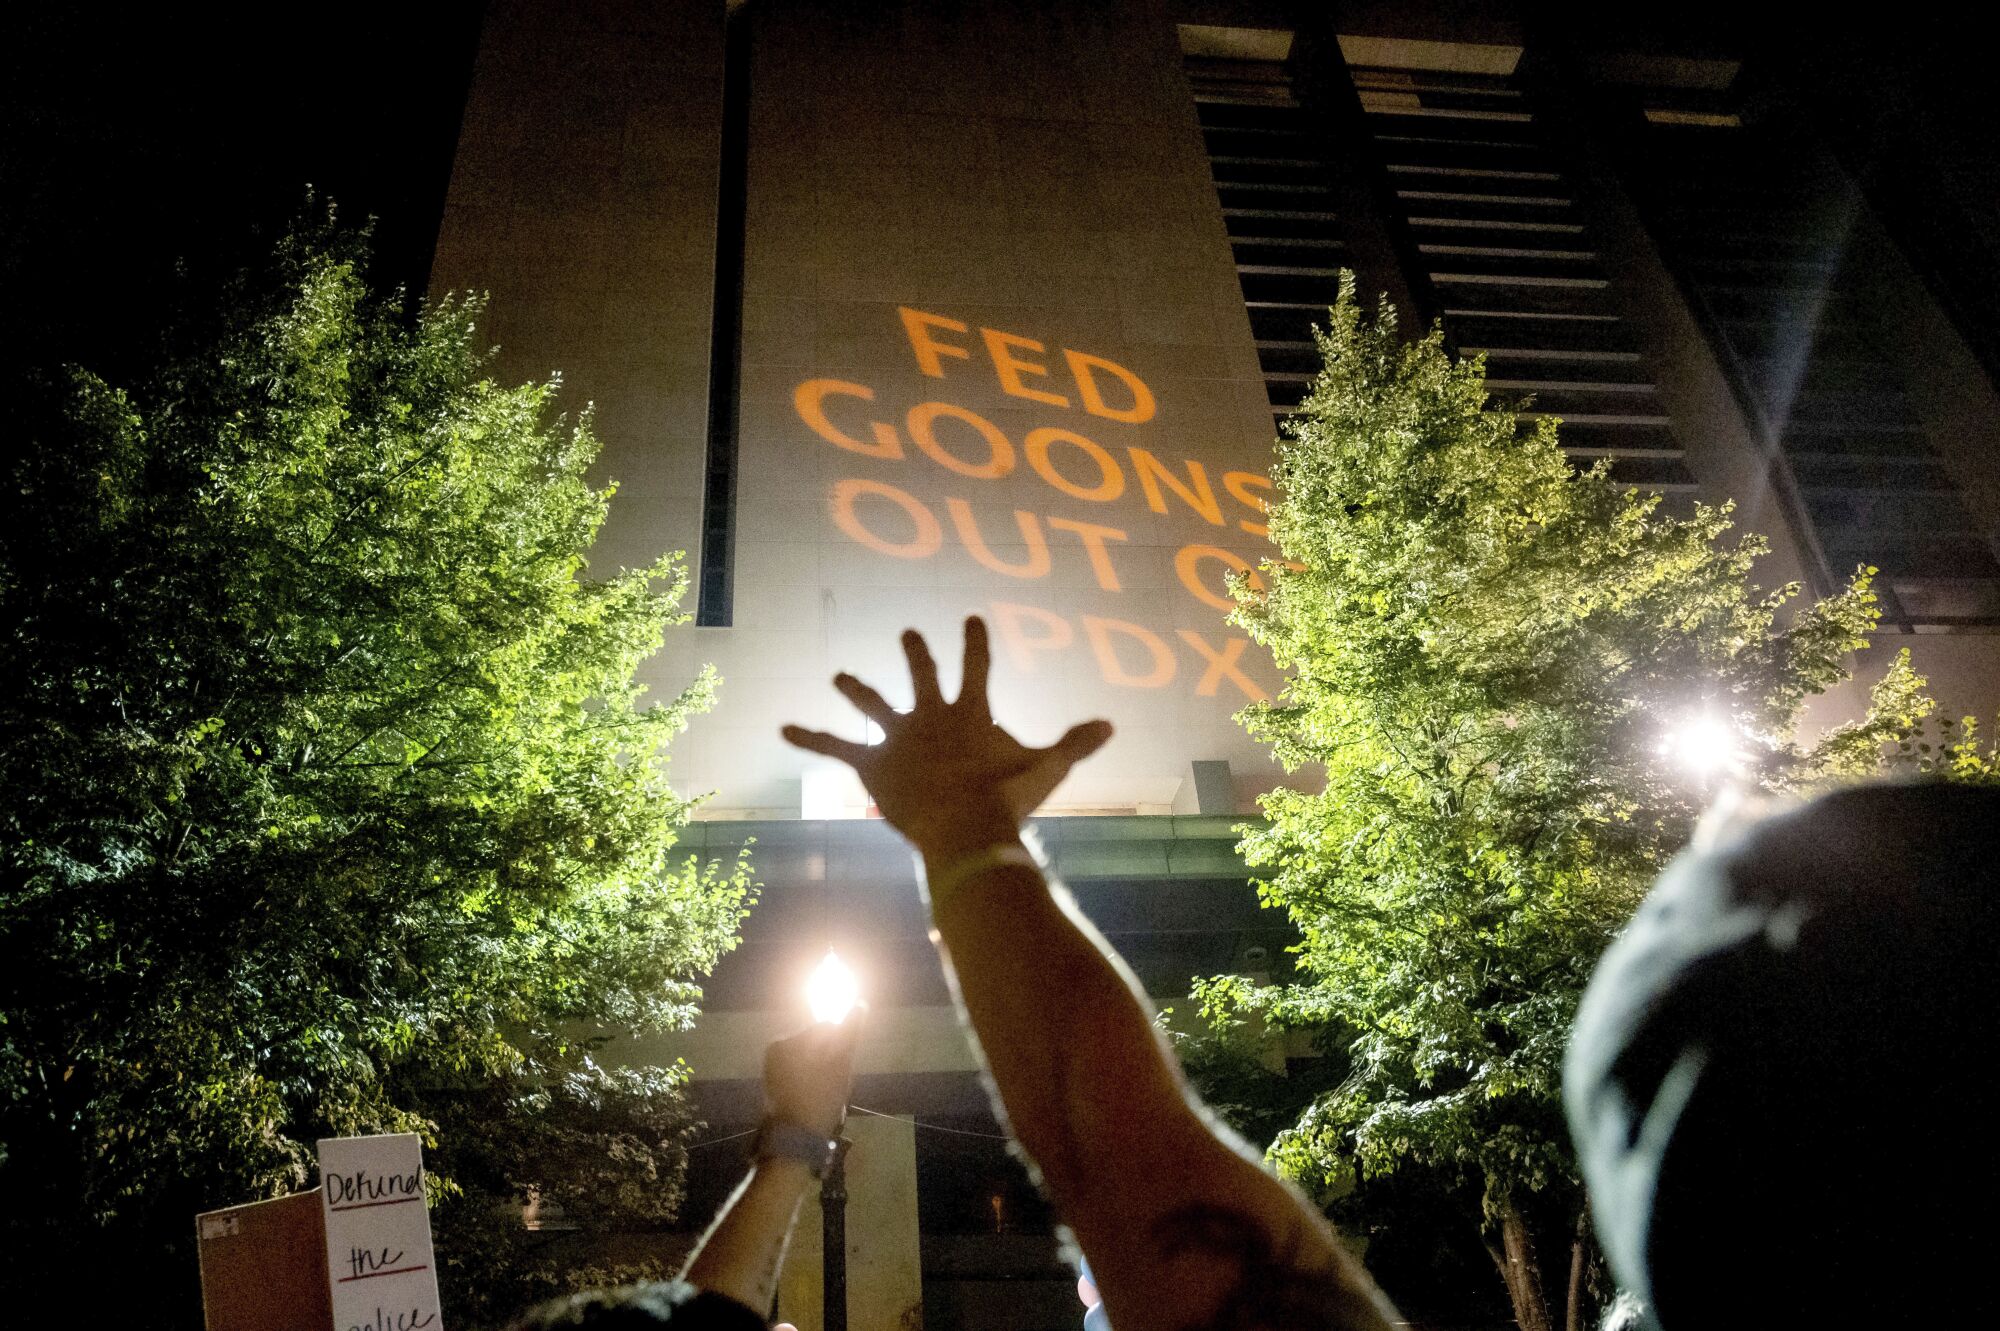 A protester raises his hand as text is projected onto the courthouse.